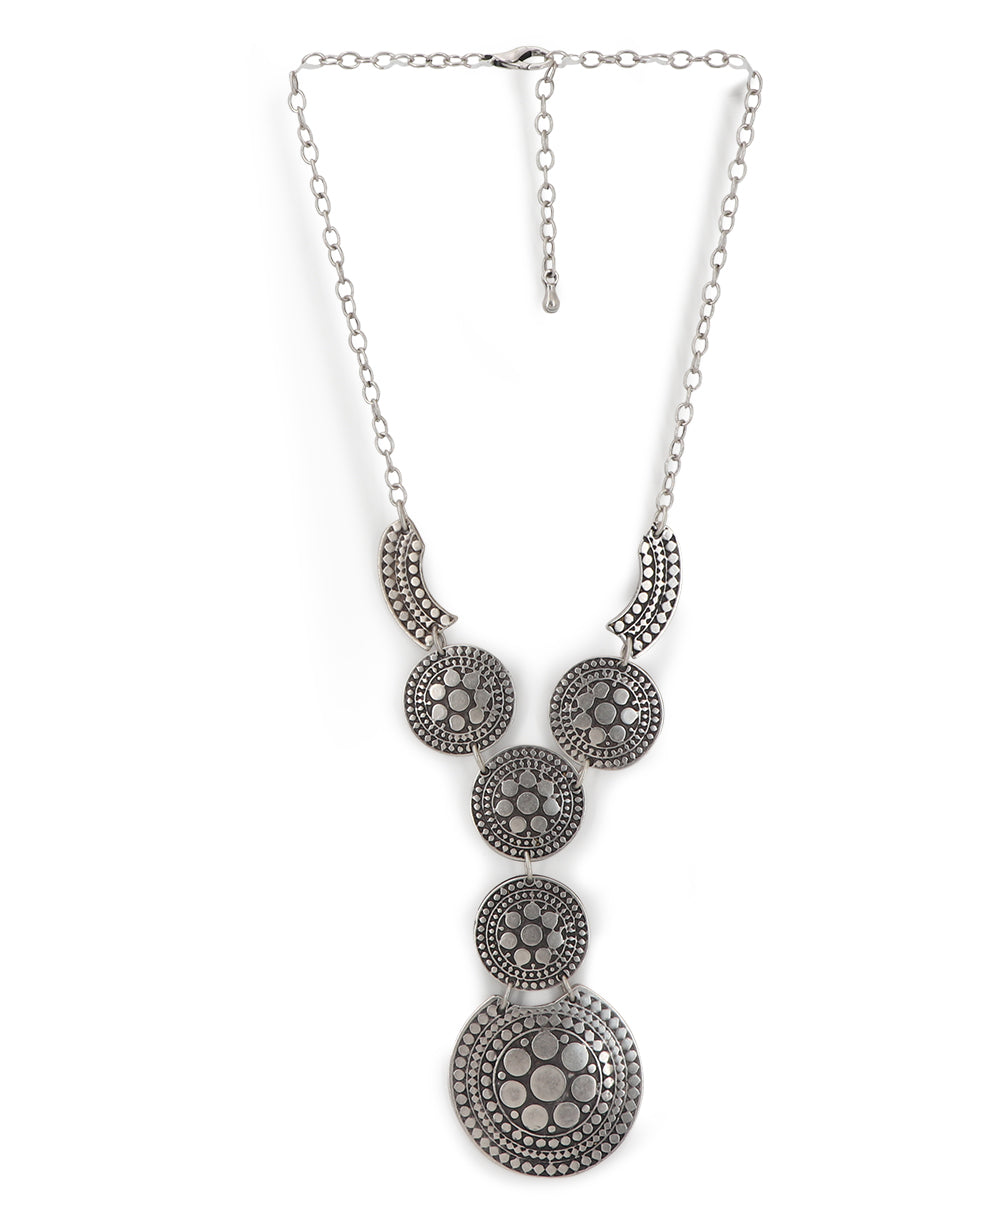 Floral Oxidized Pewter Necklace